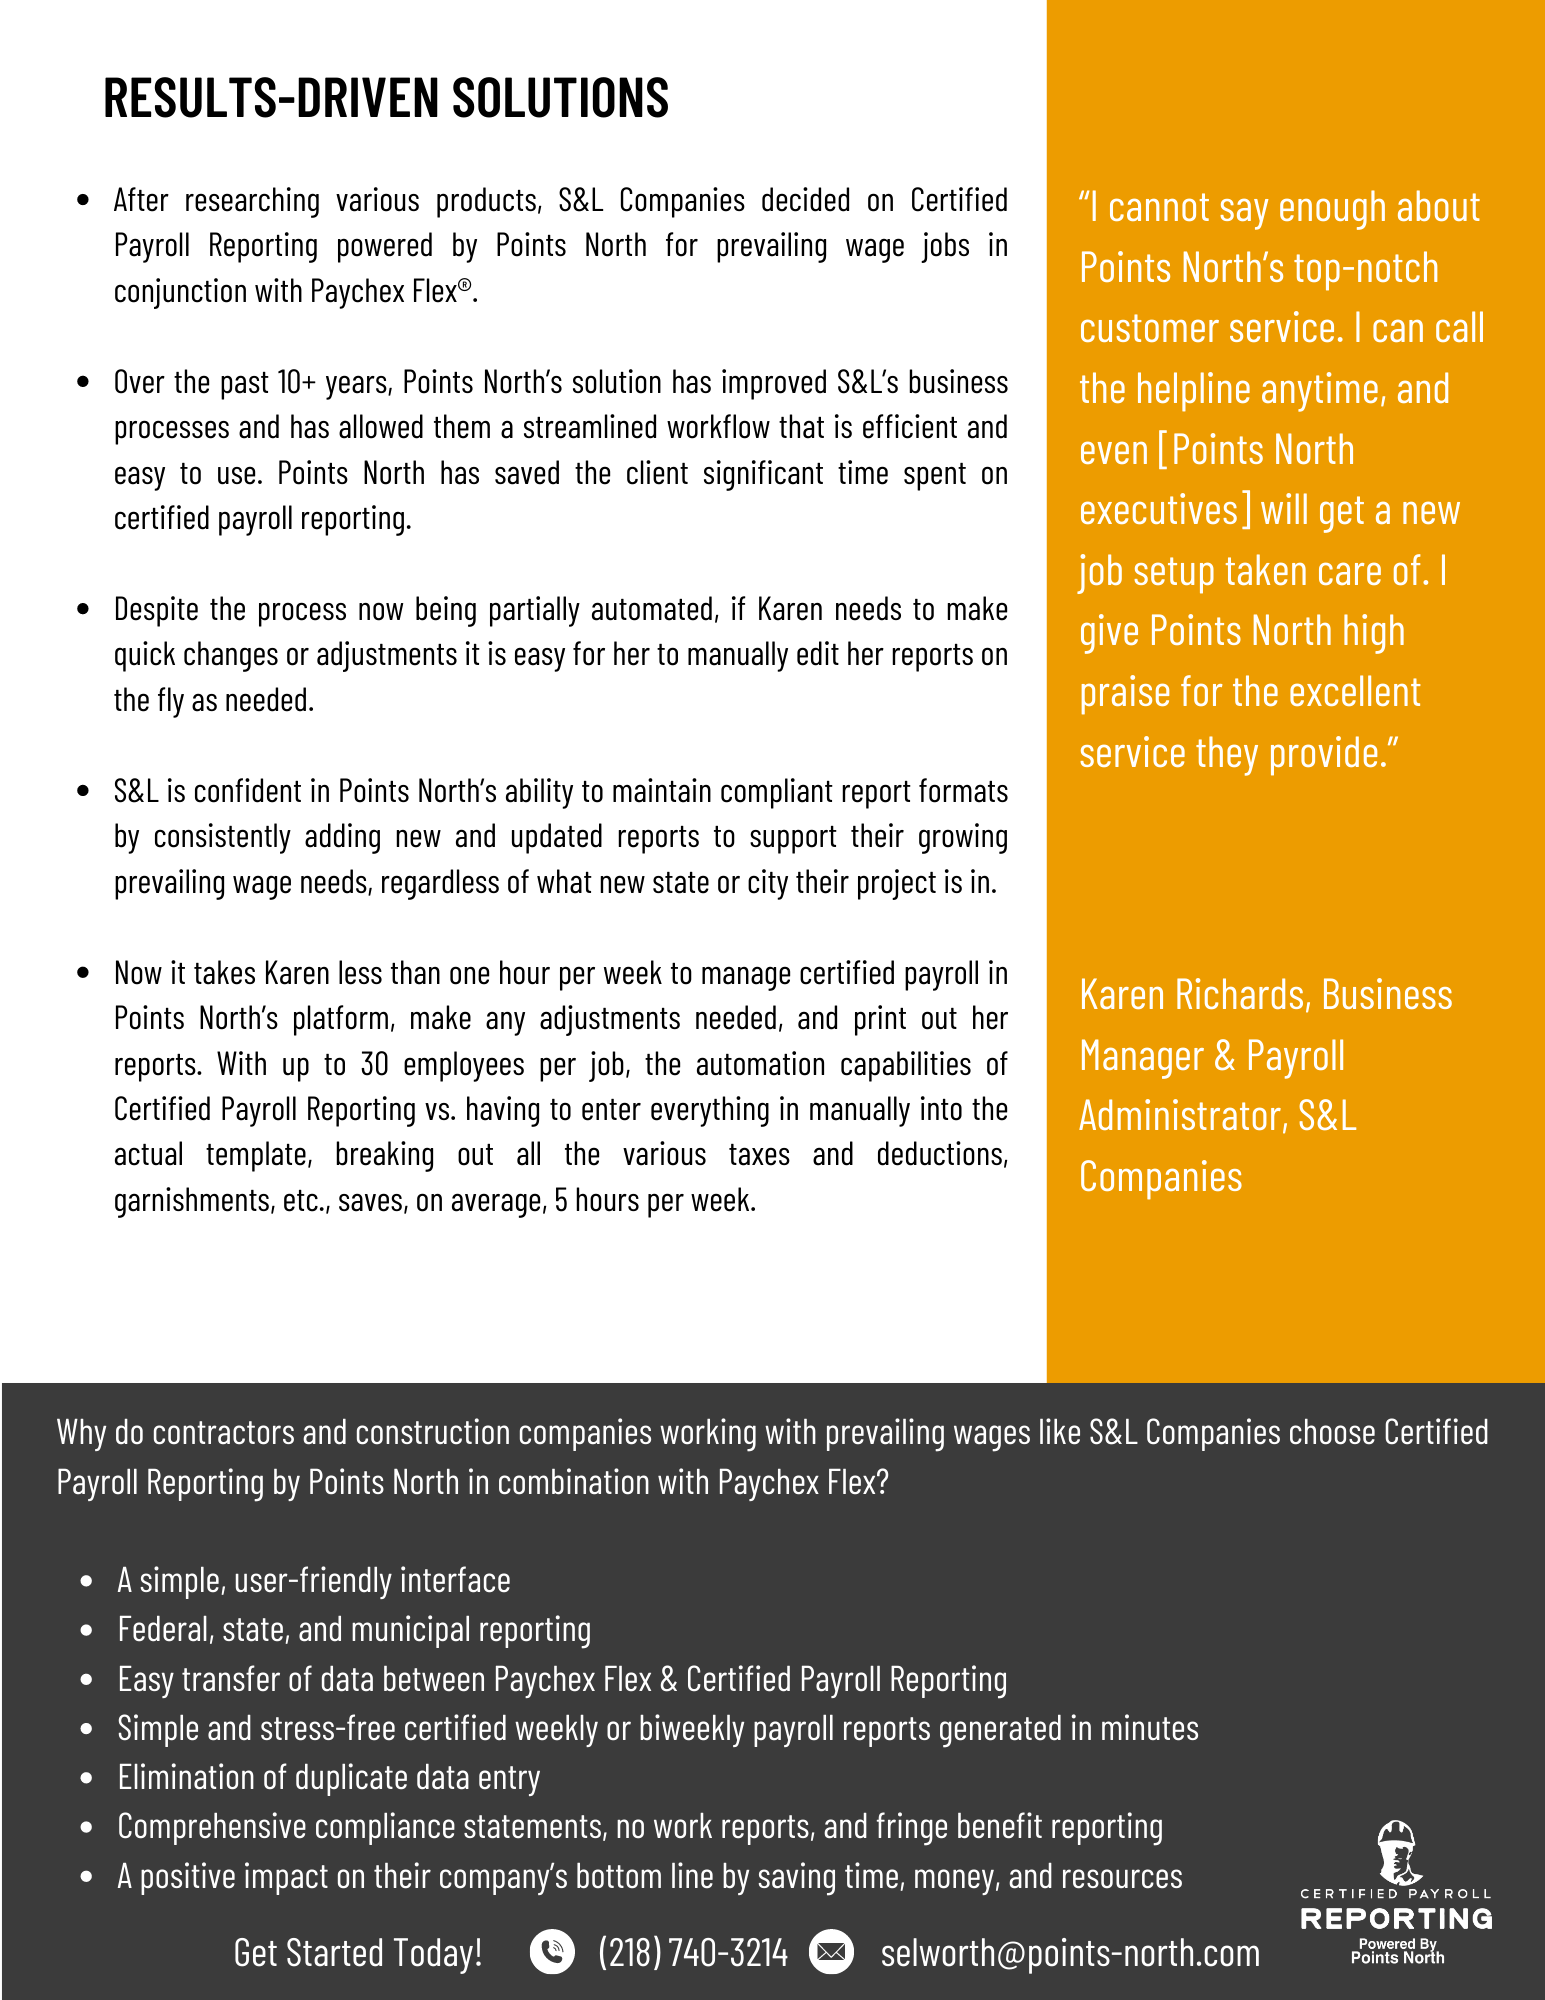 S&L Companies Case Study - CPR Page 2